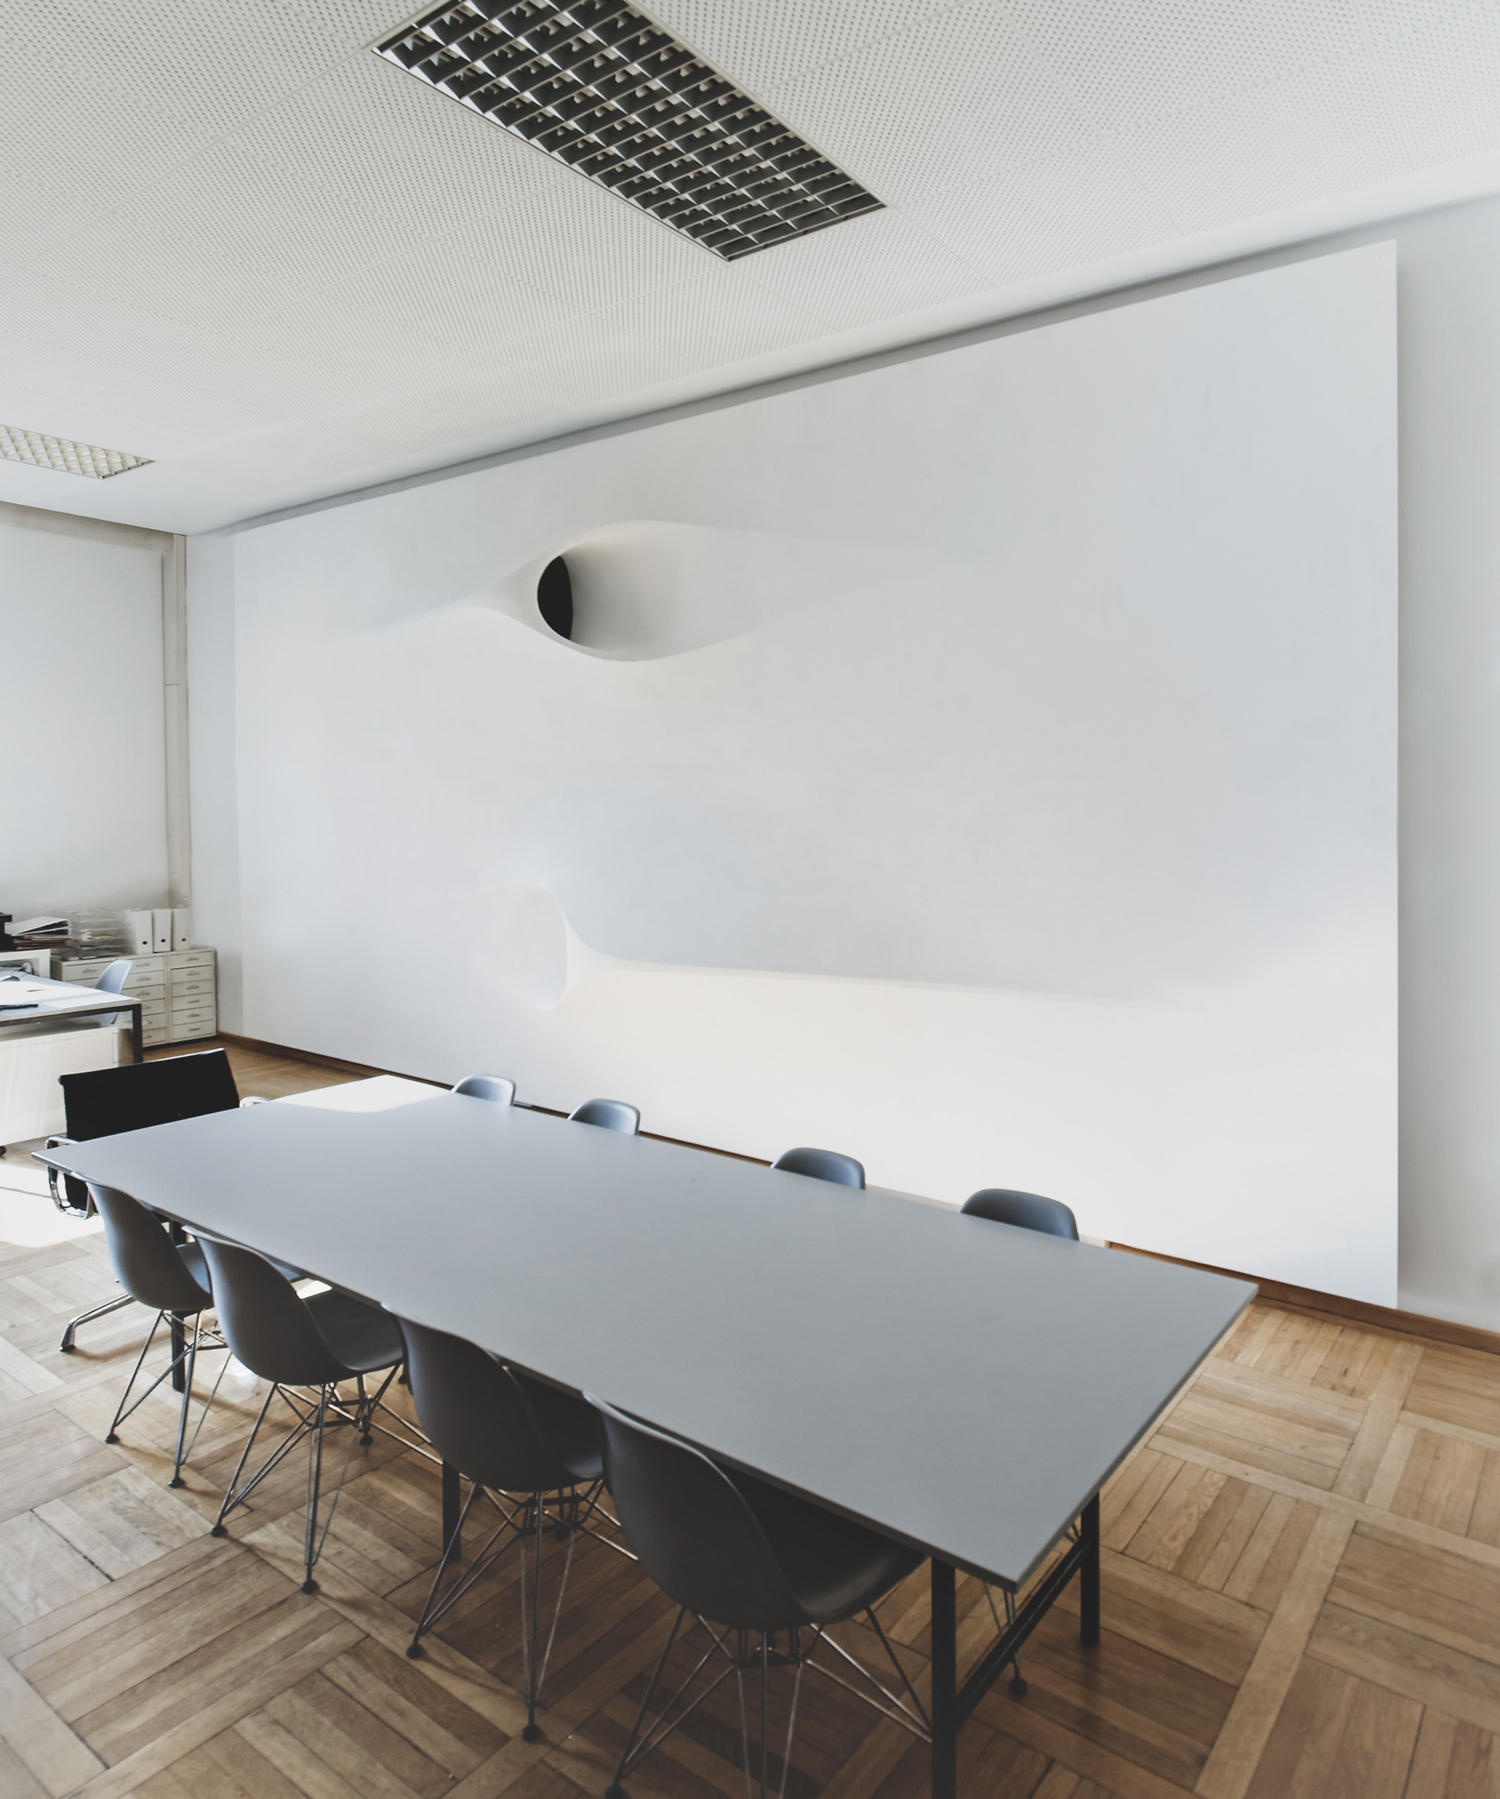 projector-ceiling-moh-architects-joerg-hugo-conferencetable2.jpg